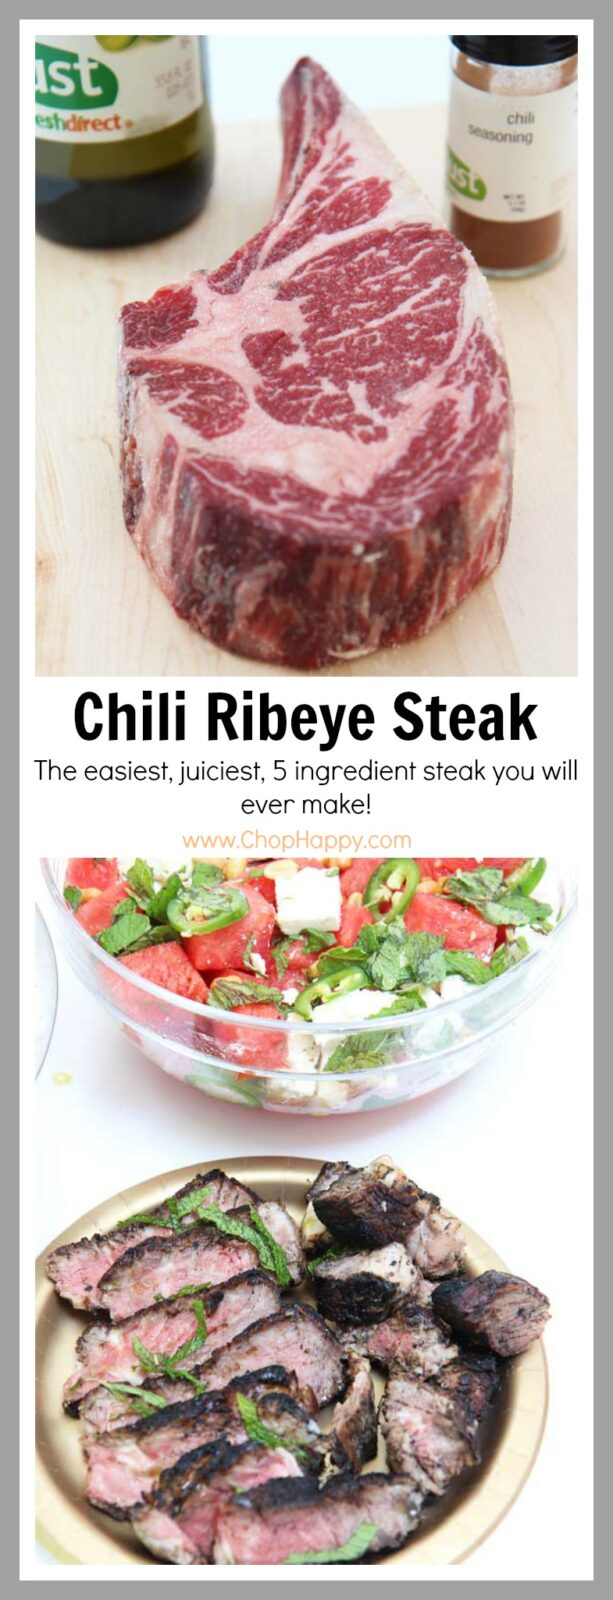 Chili Rubbed Ribeye Steak Recipe. Easiest recipe you ever made. Just season, cook both sides 7 minutes and juicy steak.